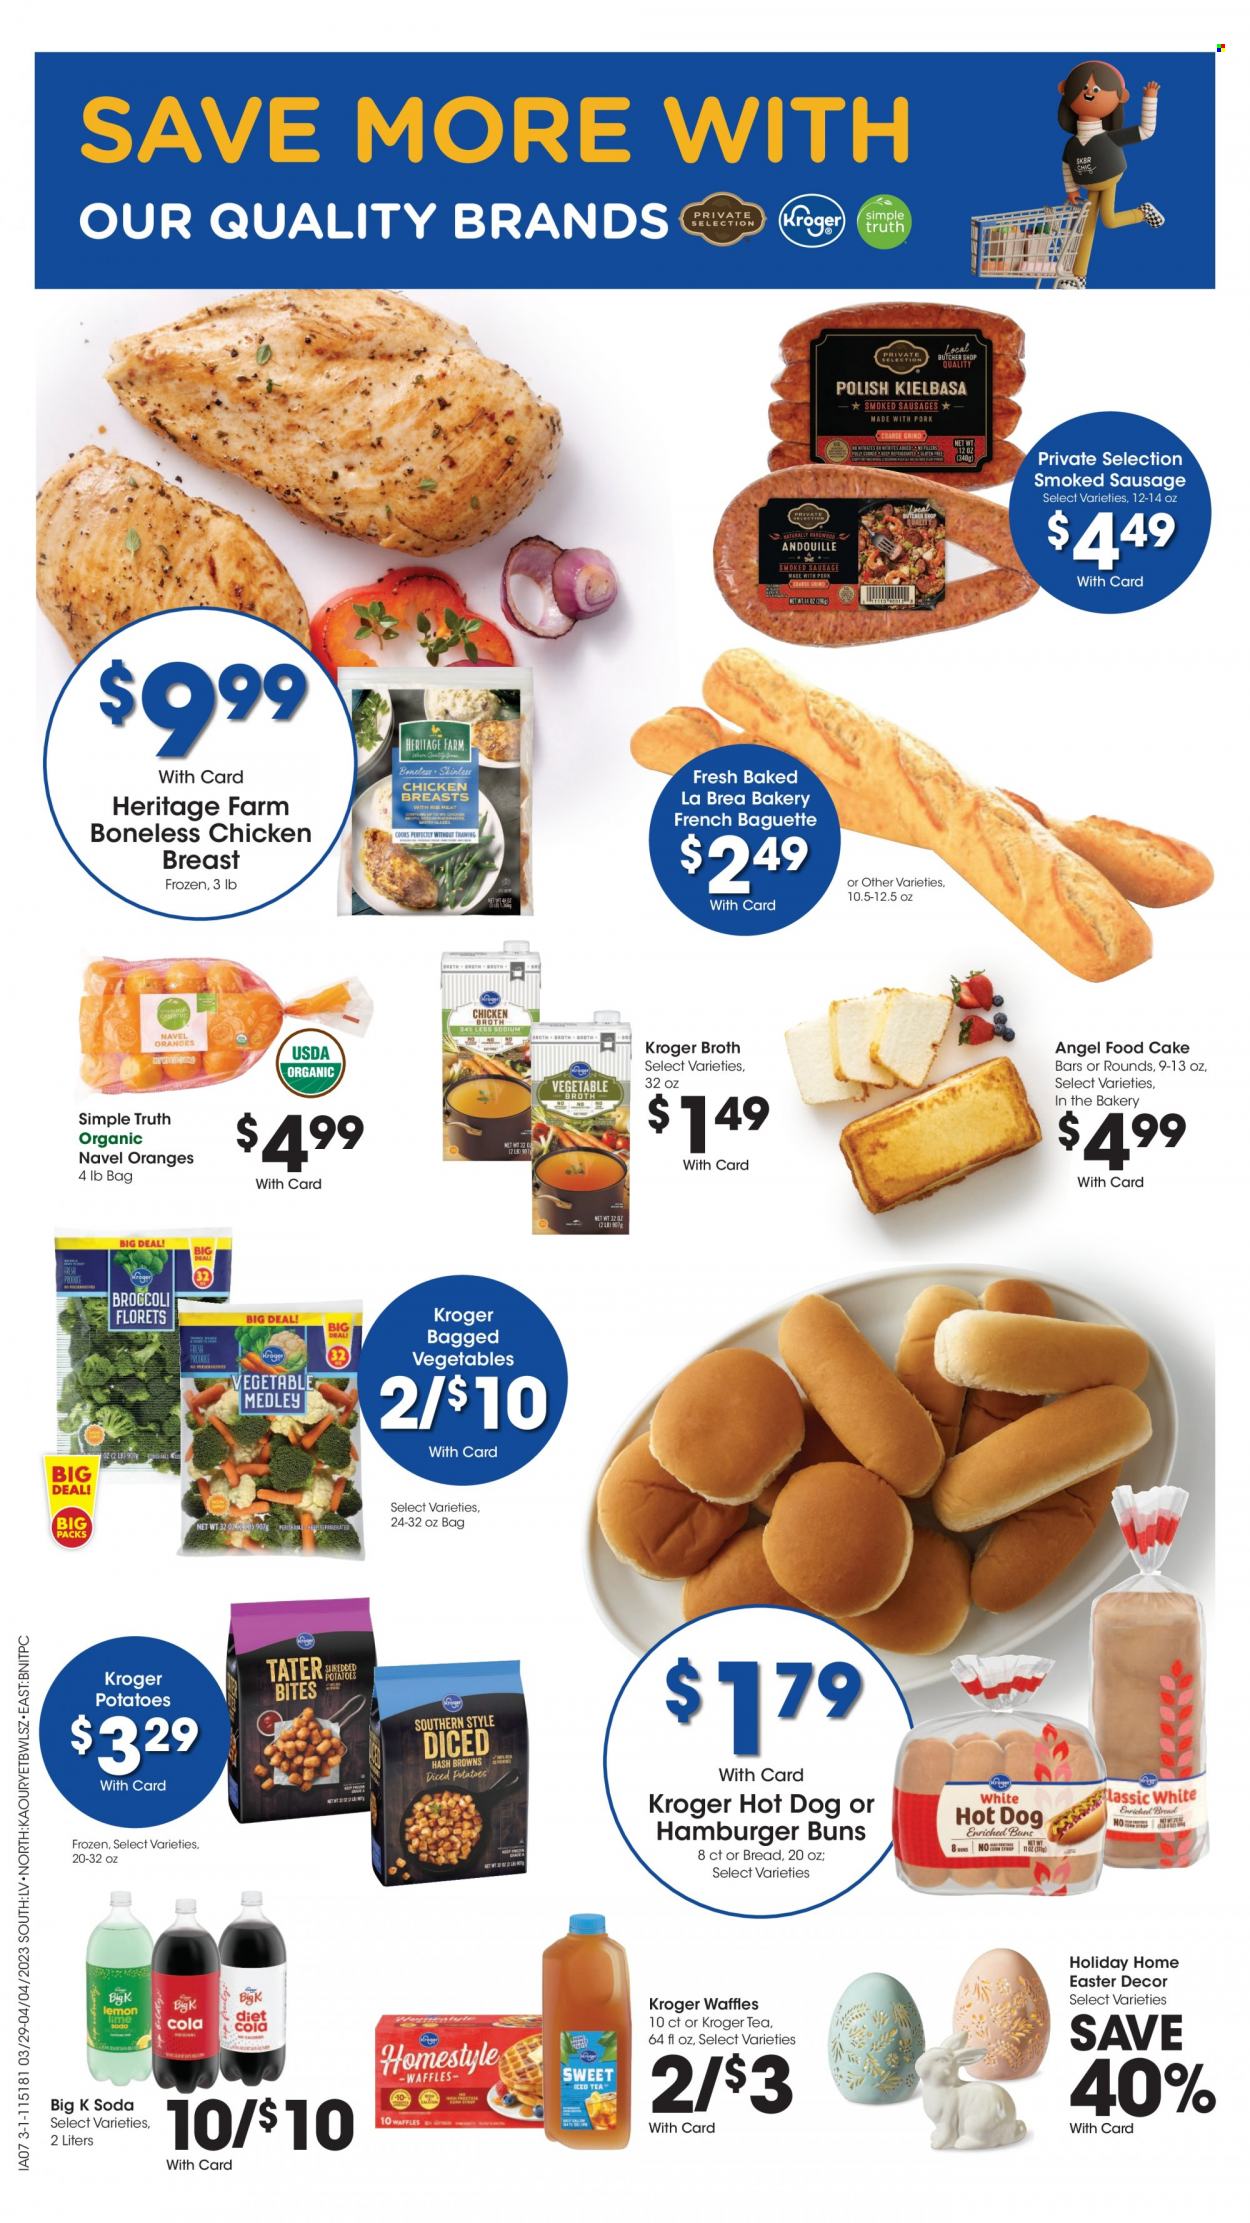 Fred Meyer ad  - 03.29.2023 - 04.04.2023.